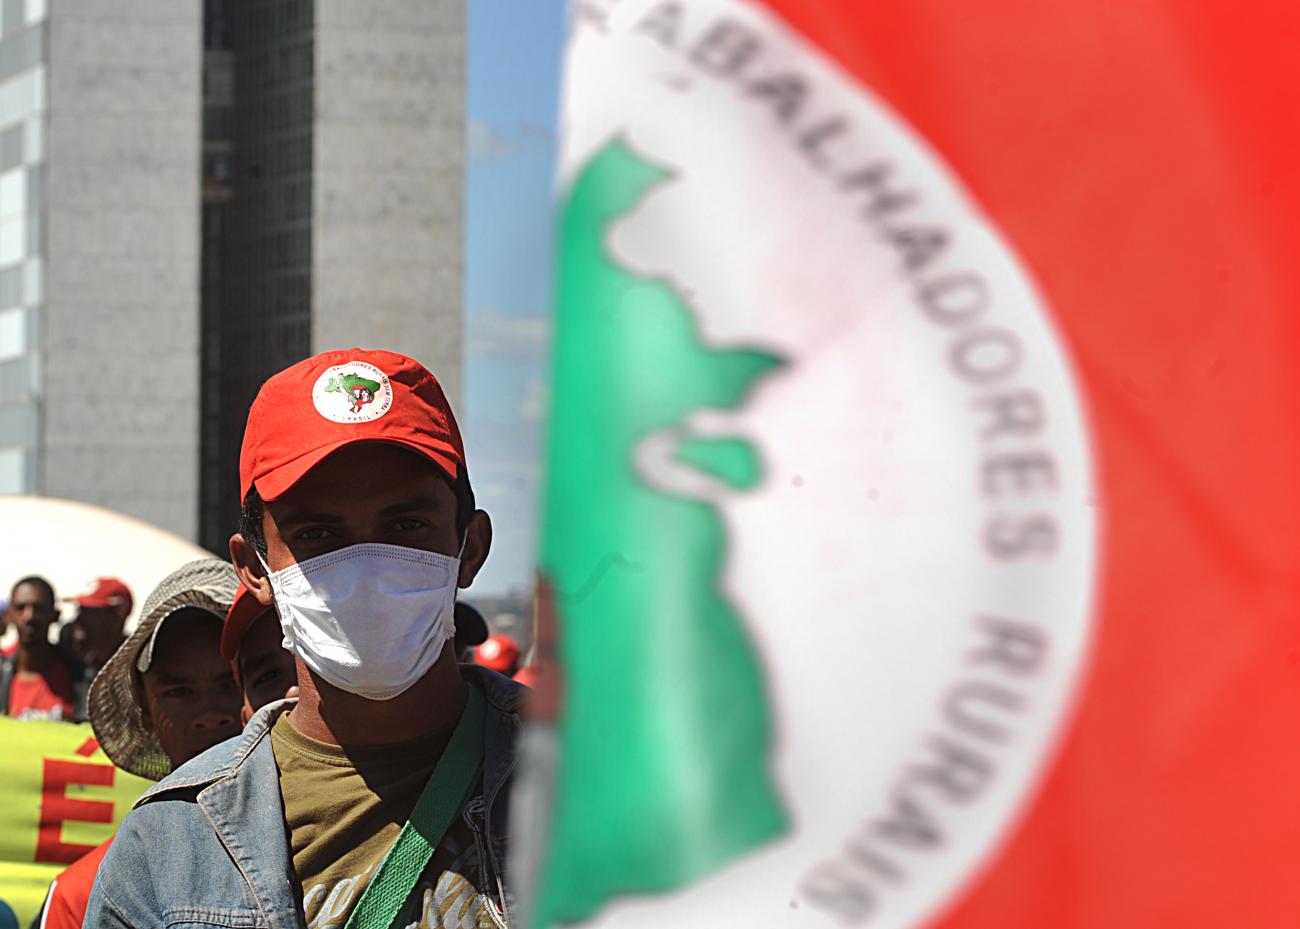 A man wears a mask while stood next beyind a red, green and white MST flag